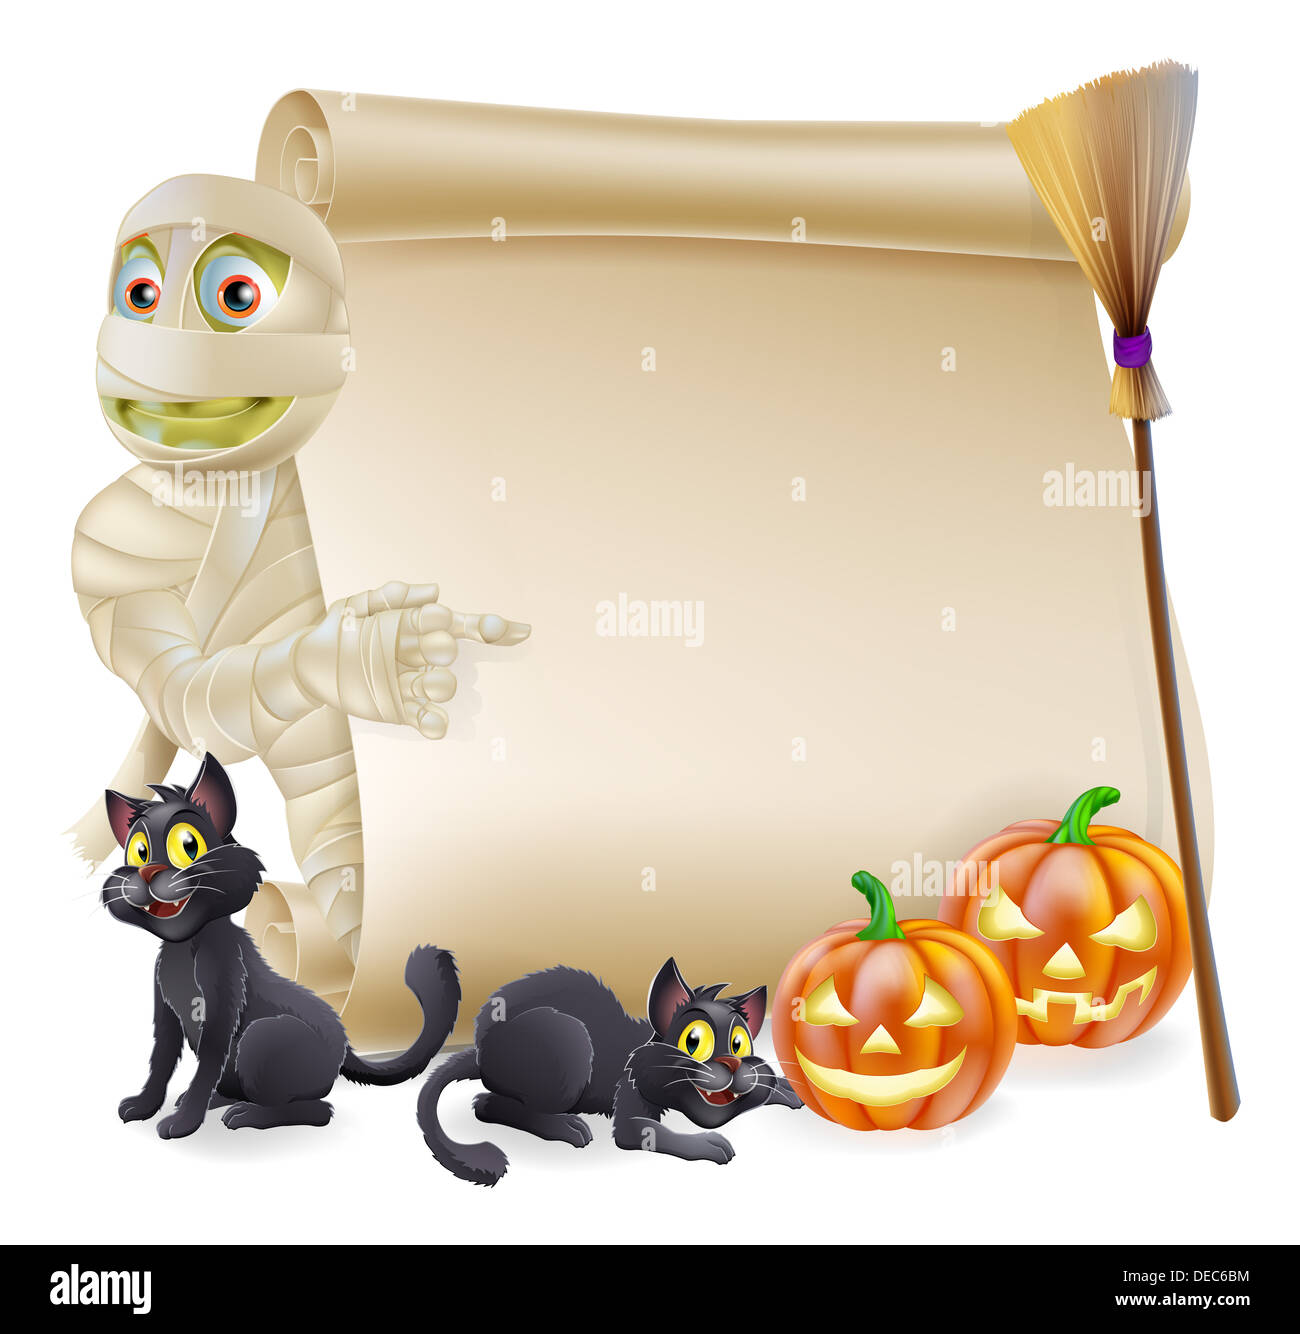 Halloween scroll or banner sign with orange carved Halloween pumpkins and cartoon mummy character Stock Photo